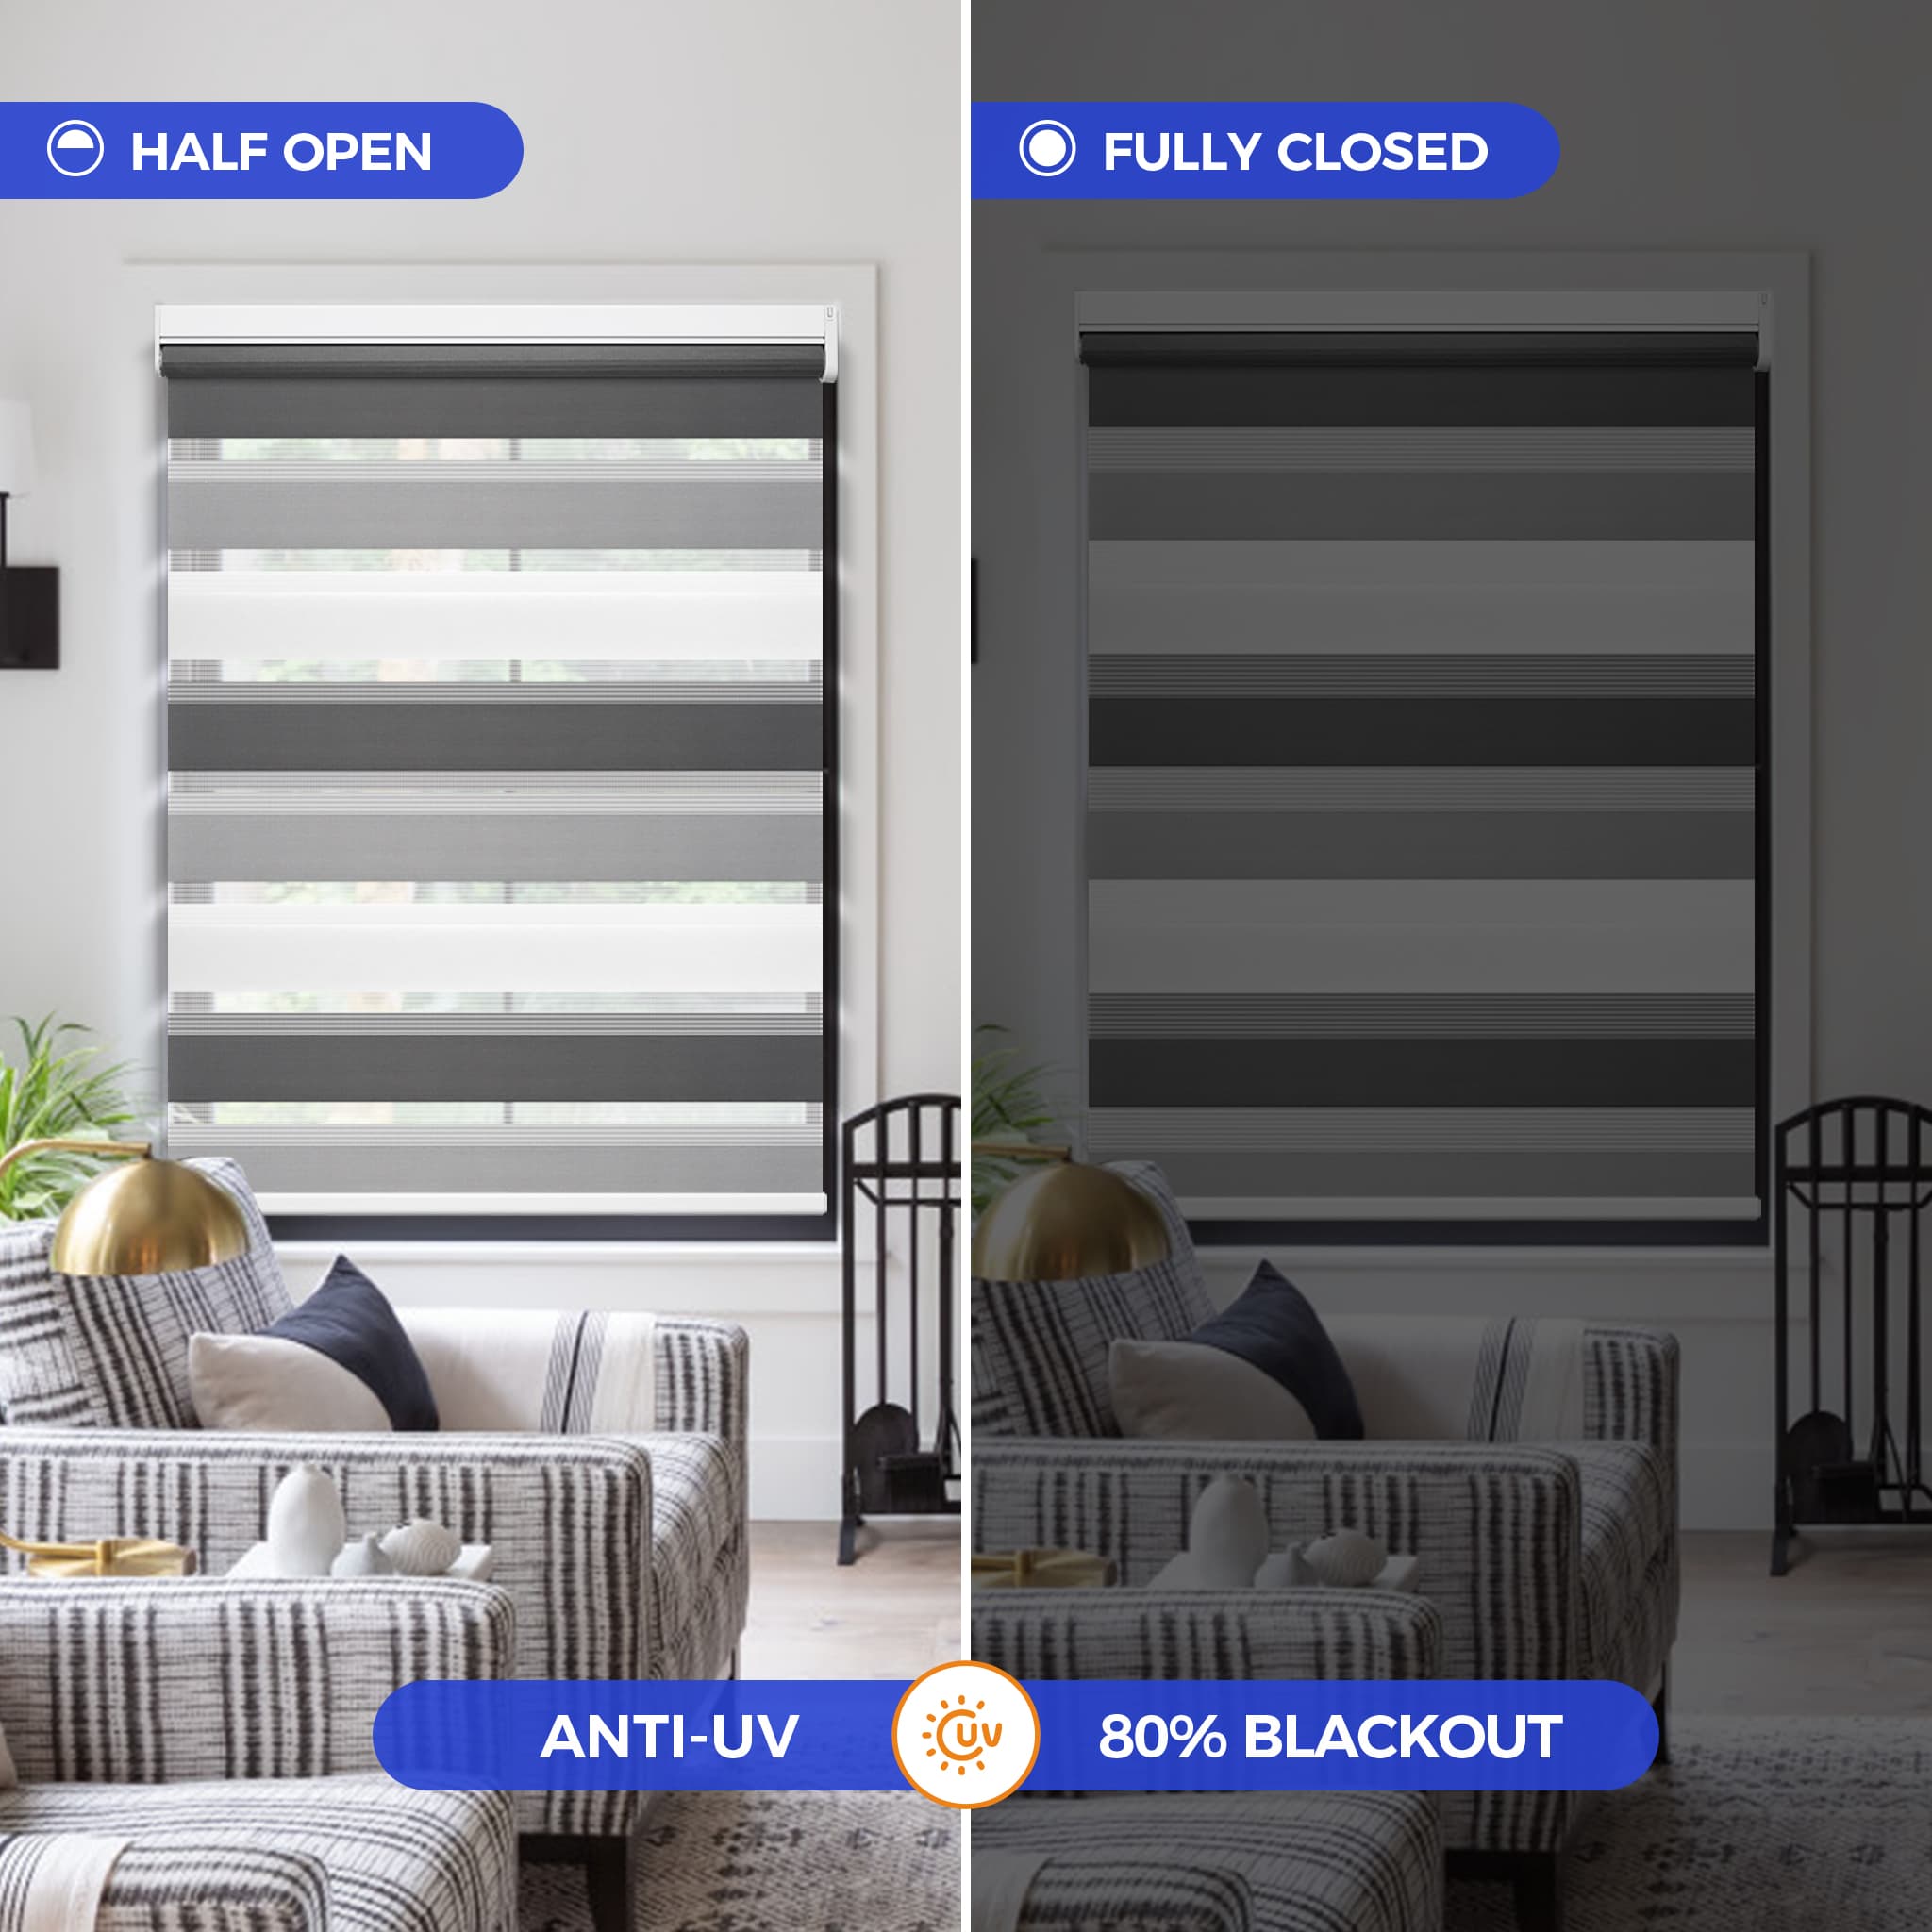 zebra window shades for privacy and light control